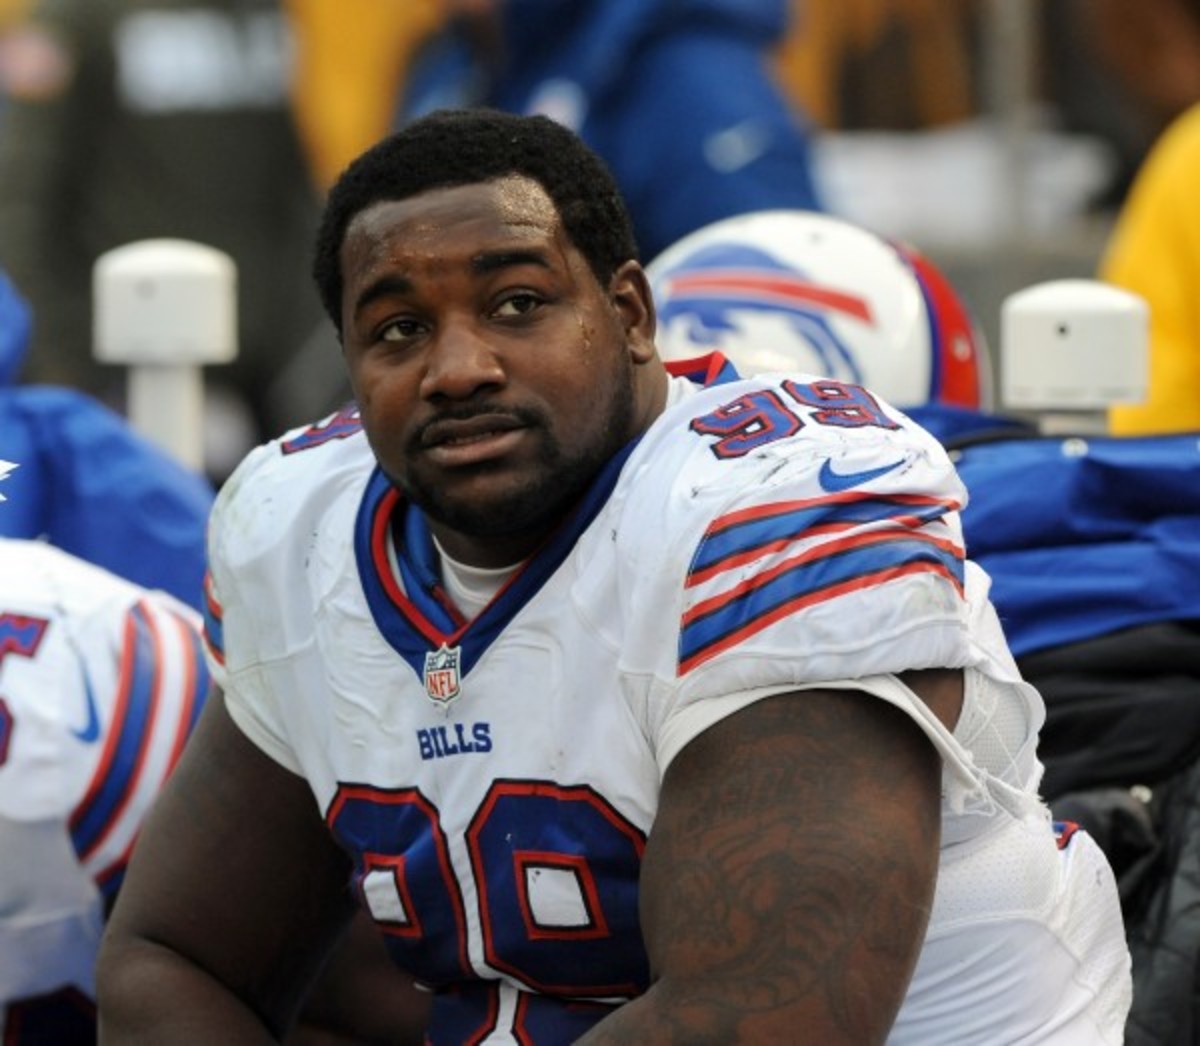 Bills defensive tackle Marcell Dareus was arrested a few weeks ago for possession of marijuana and drug paraphernalia. (George Gojkovich/Getty Images)